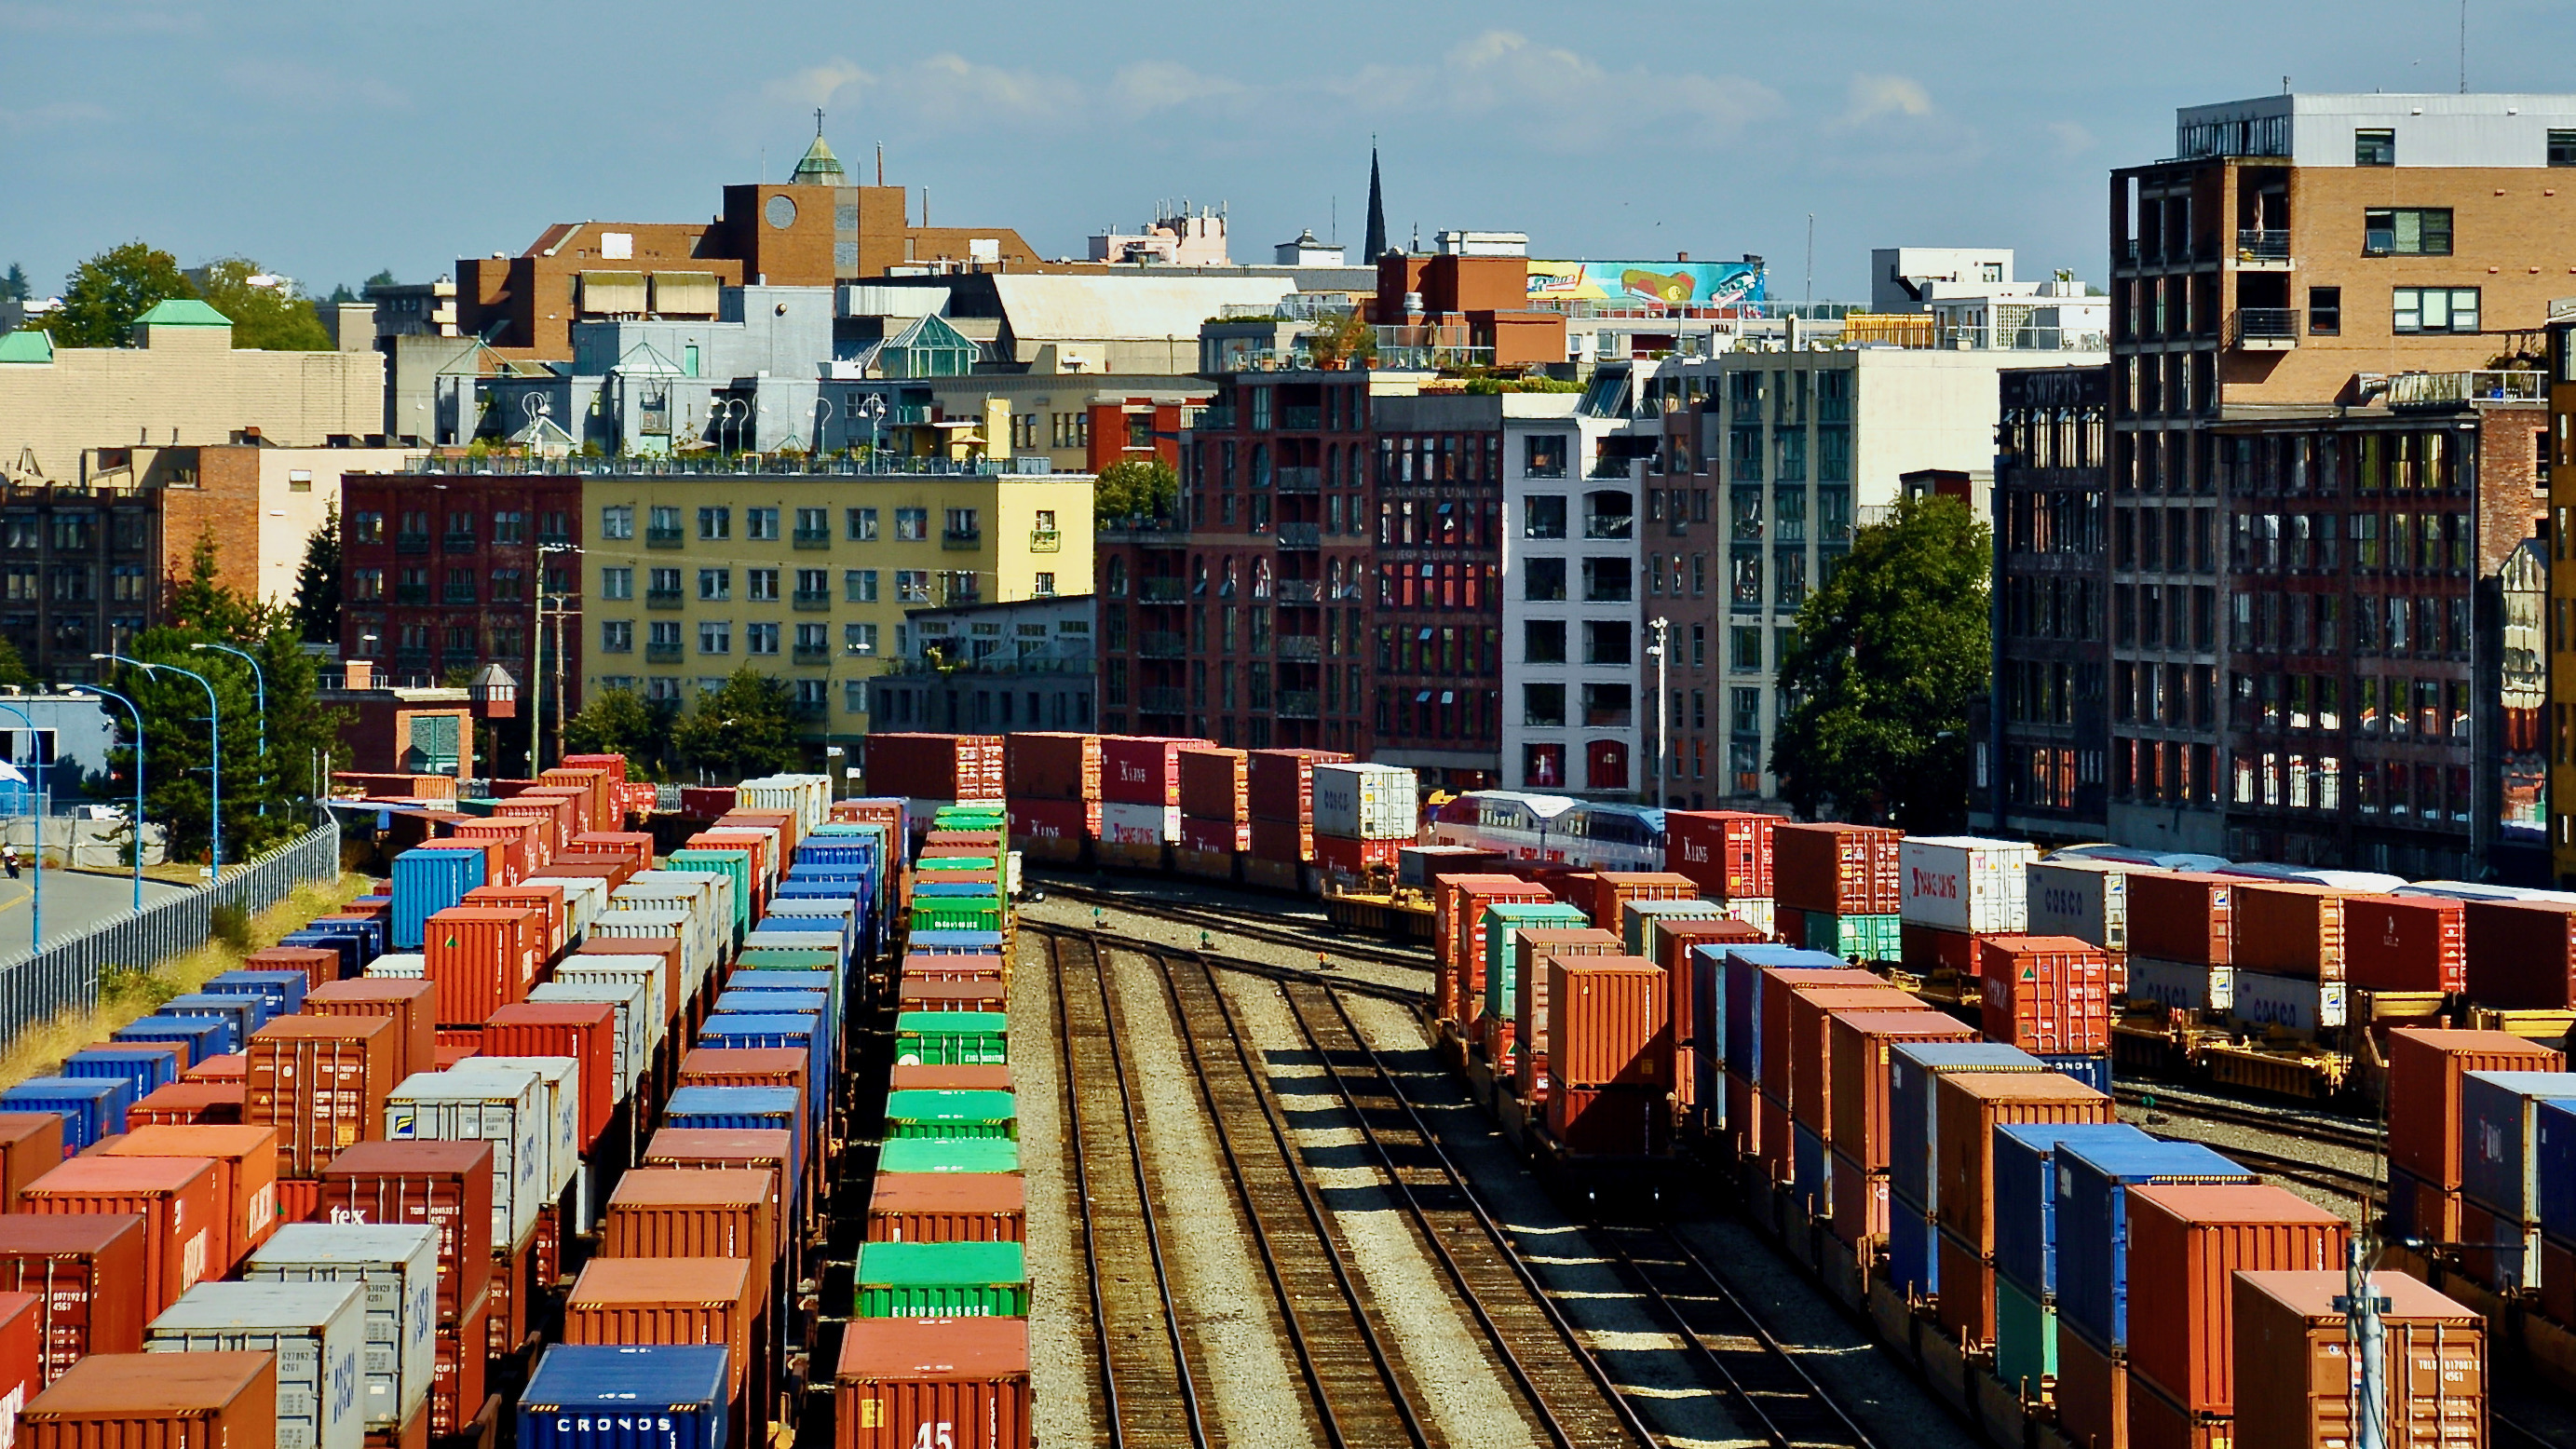 Rail cars loaded with intermodal containers near the port of Vancouver, with the city skyline behind it.